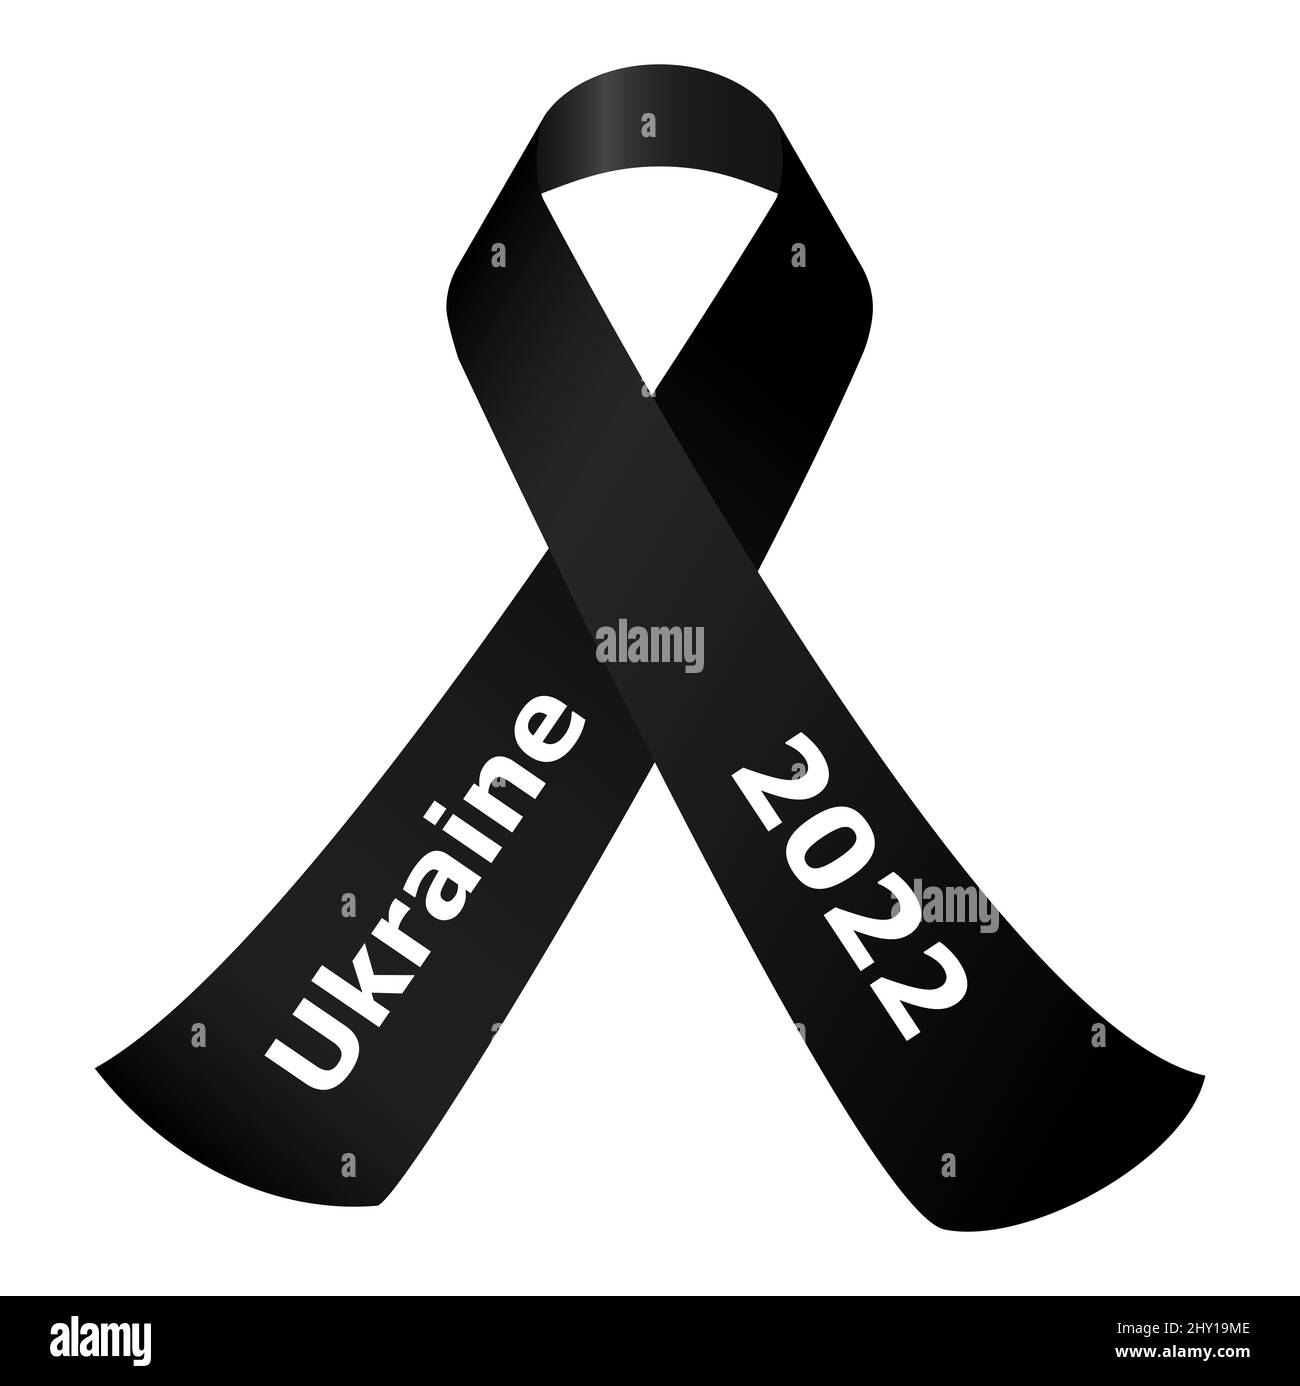 eps vector illustration of black mourning ribbon with text ukraine and 2022 - STOP WAR - conflict with russia 2022 Stock Photo